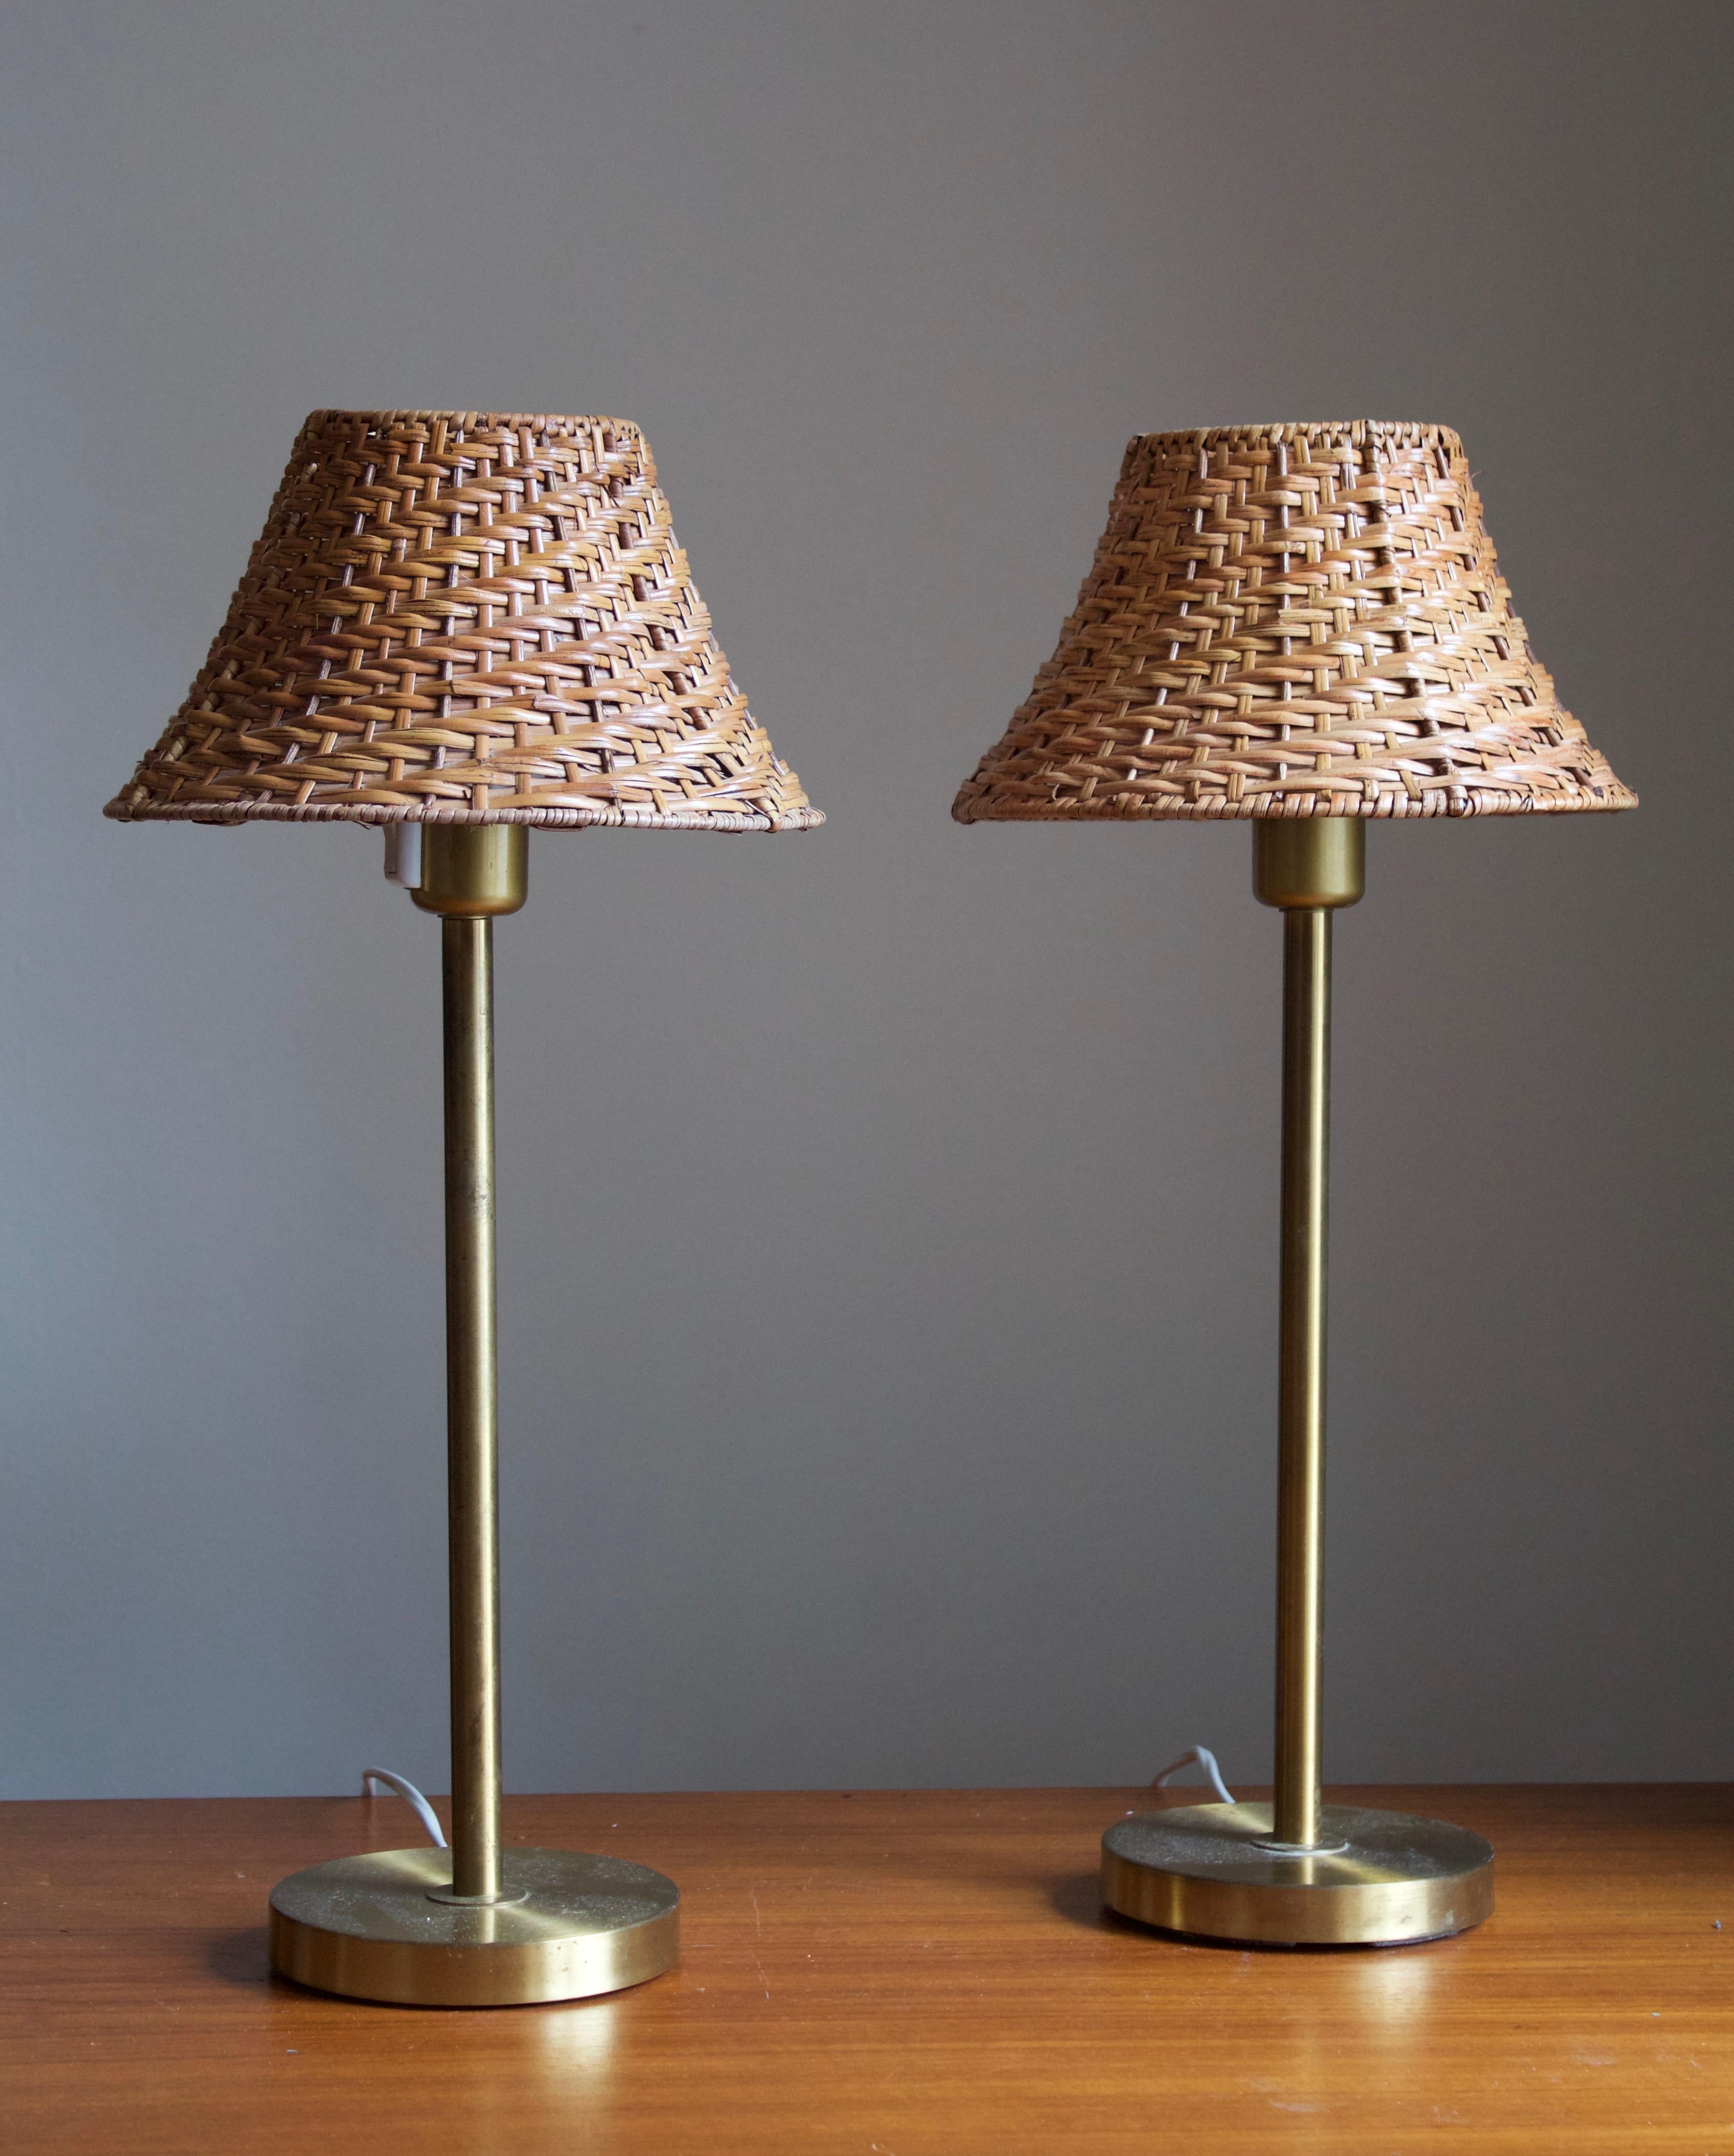 A pair of table lamps of pure and simple form and execution. Designed and produced by Boréns, Borås, Sweden, c. 1970s. 

In brass, sockets in brass-colored plastic. 

Stated dimensions exclude lampshades. Upon request illustrated vintage rattan